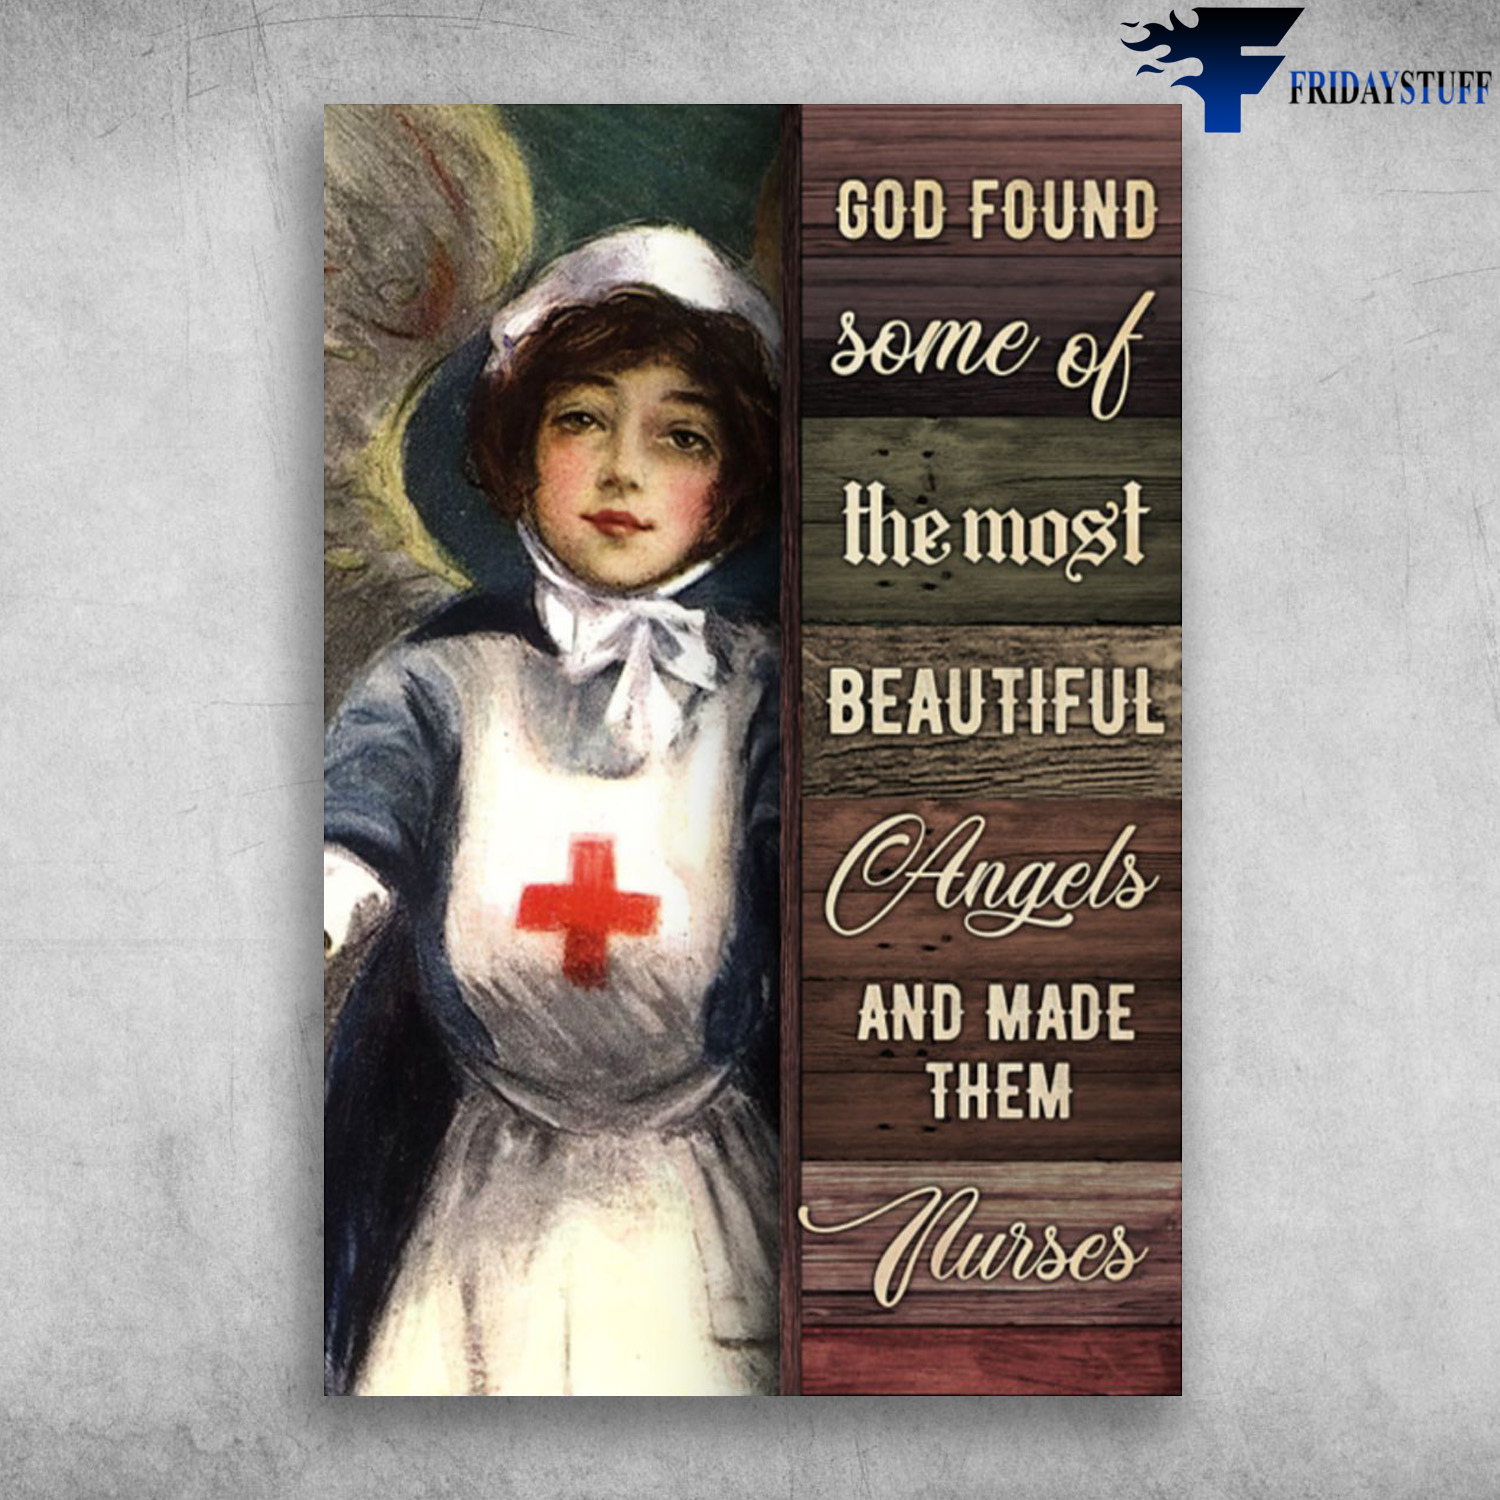 The Nurses - God Found Some Of The Most Beautiful Angels, And Made Them Nurses